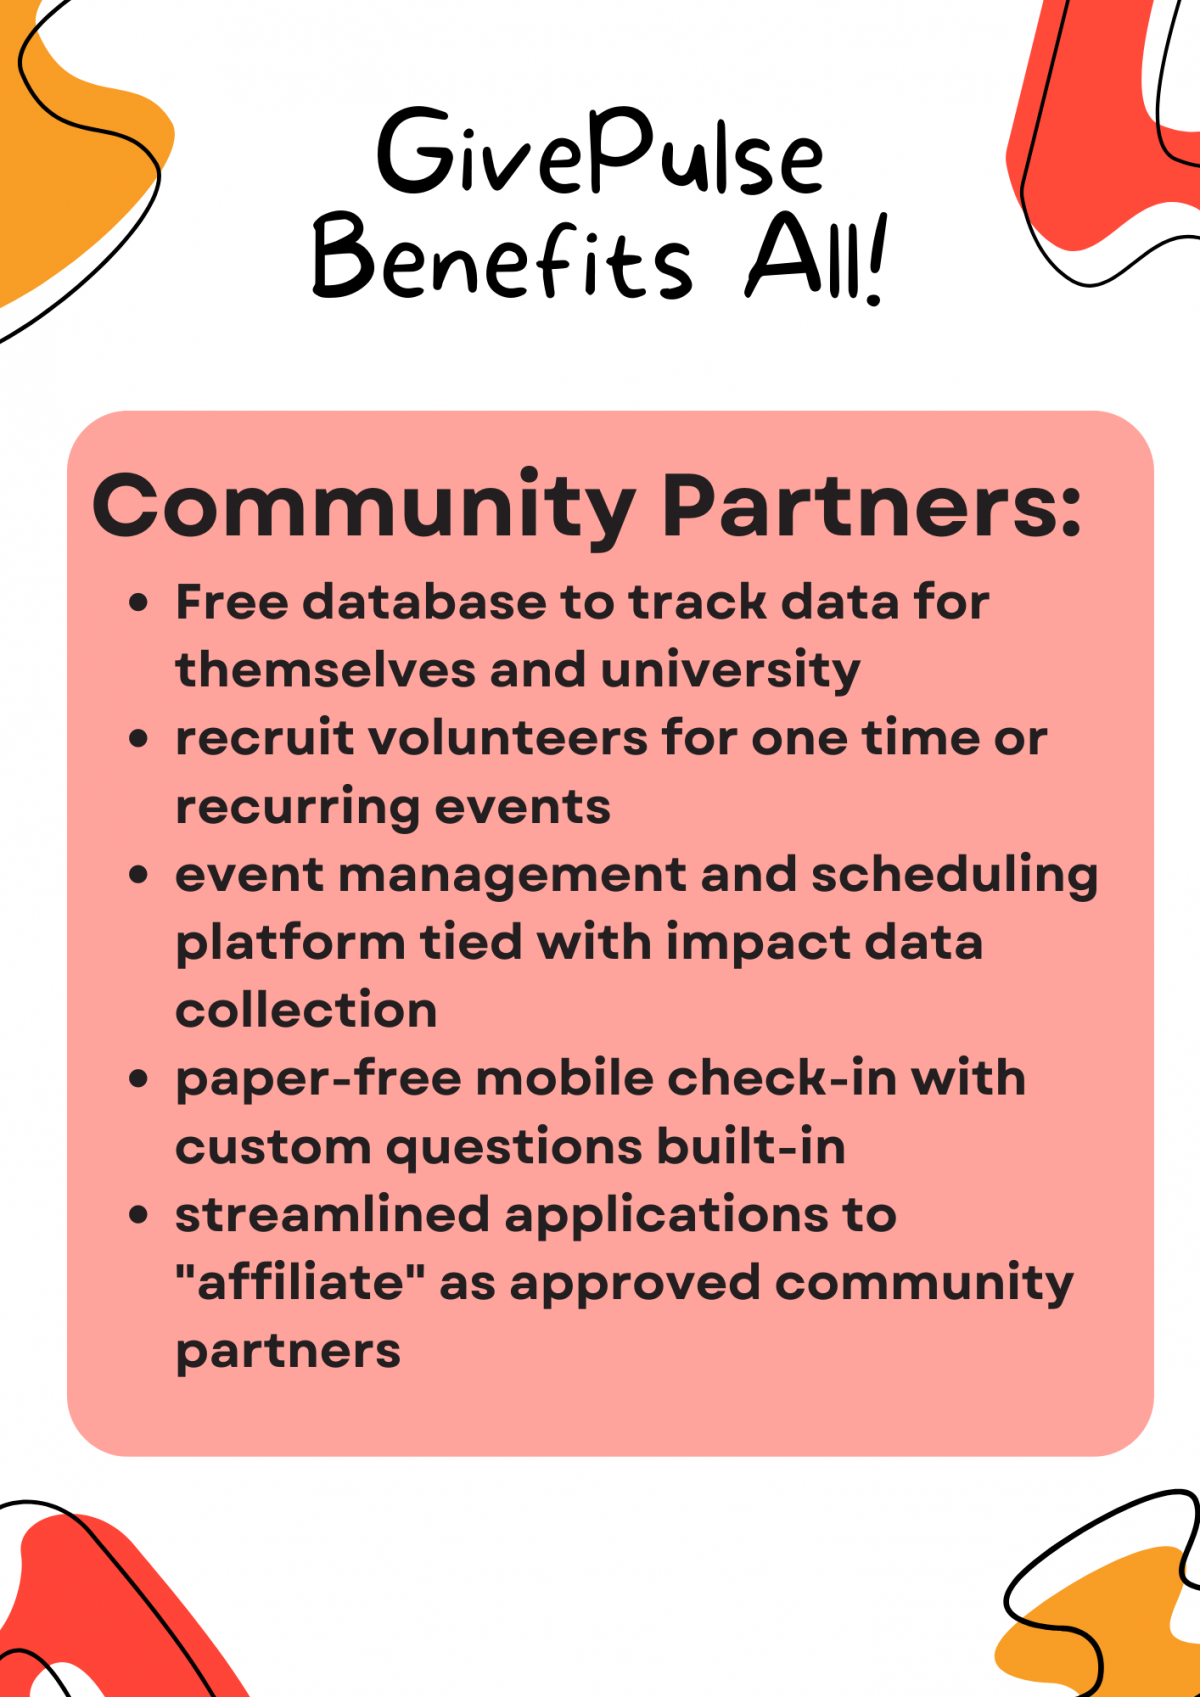 GivePulse Benefits for Community Partners 